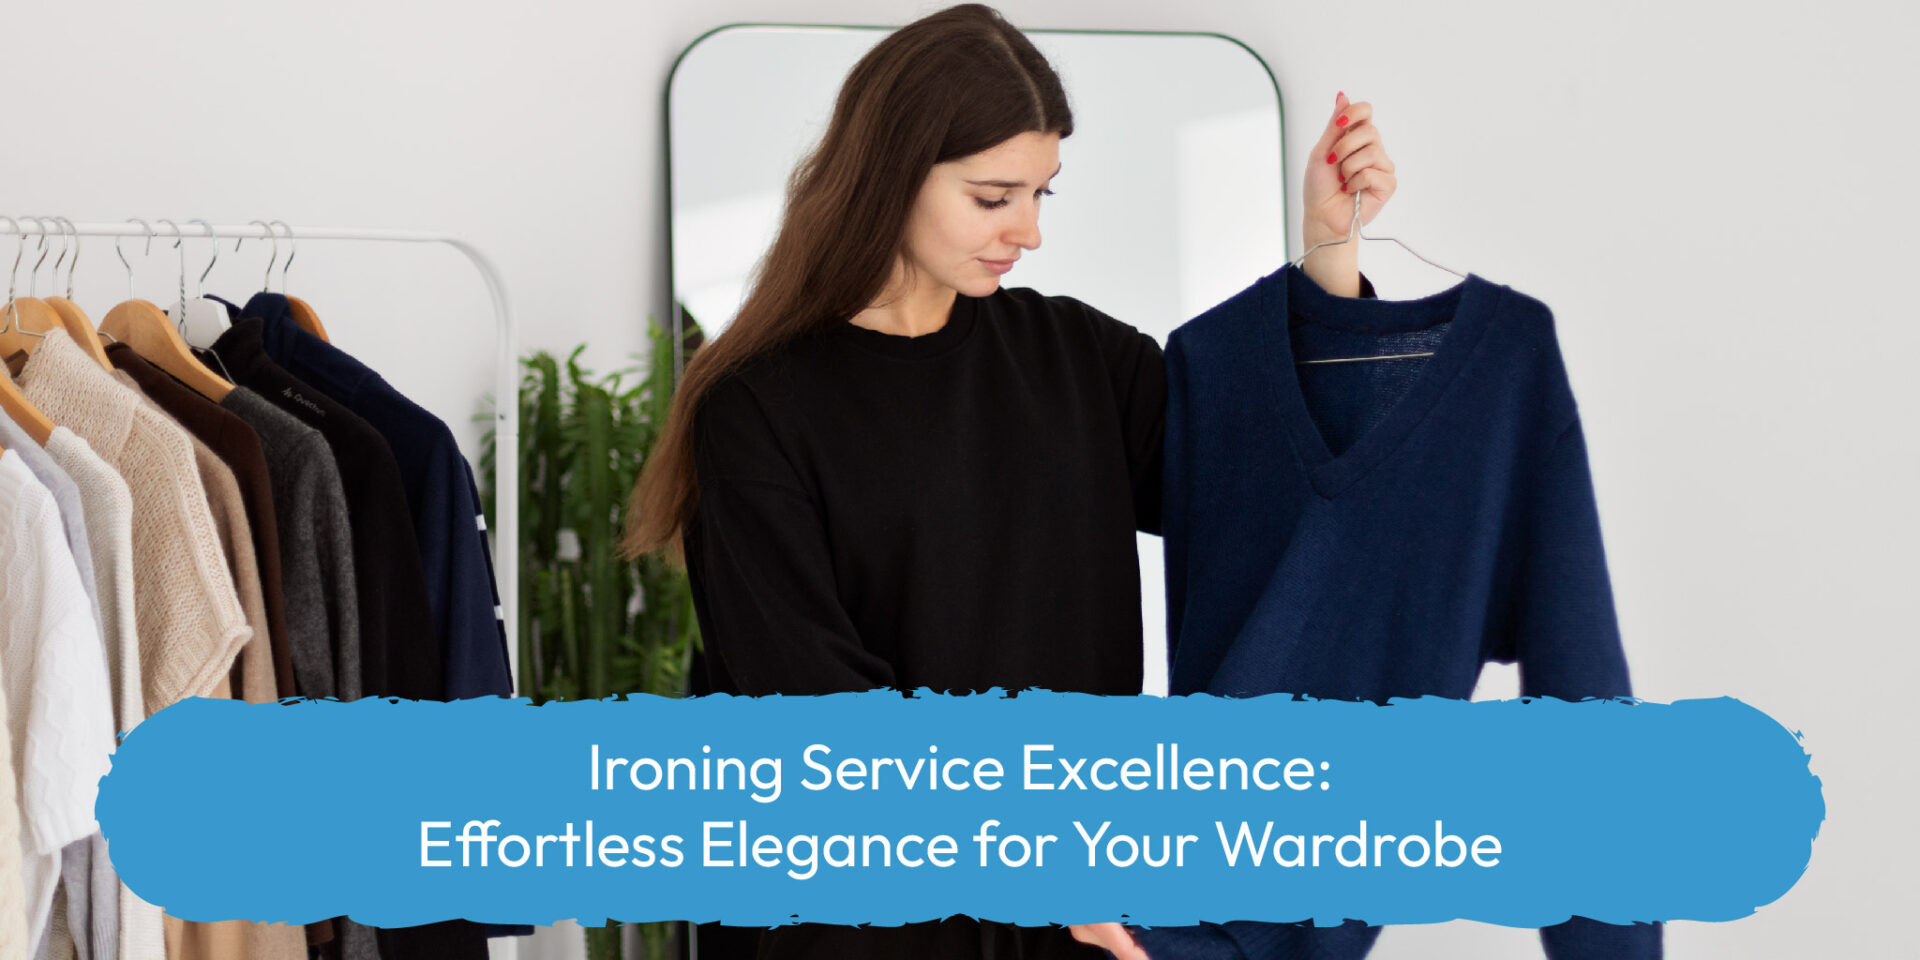 Ironing Service Excellence: Effortless Elegance for Your Wardrobe